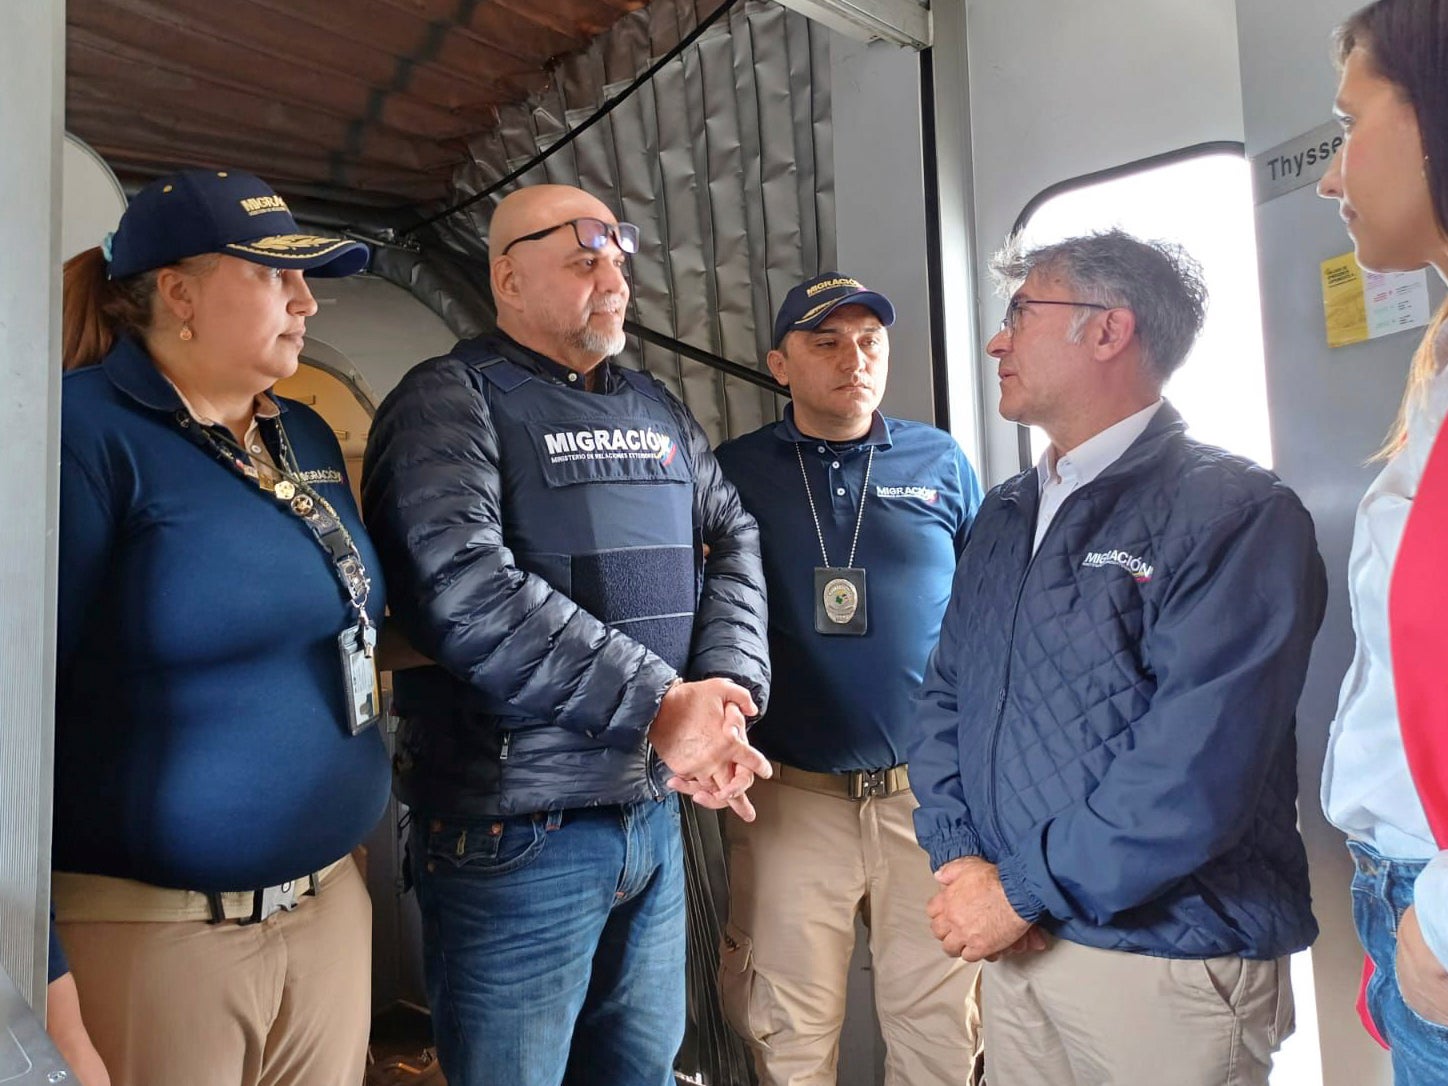 In this photo released by the Colombian Immigration agency, migration officials meet former Colombian paramilitary leader, Salvatore Mancuso, at the gate of the plane at El Dorado International Airport in Bogota, Colombia